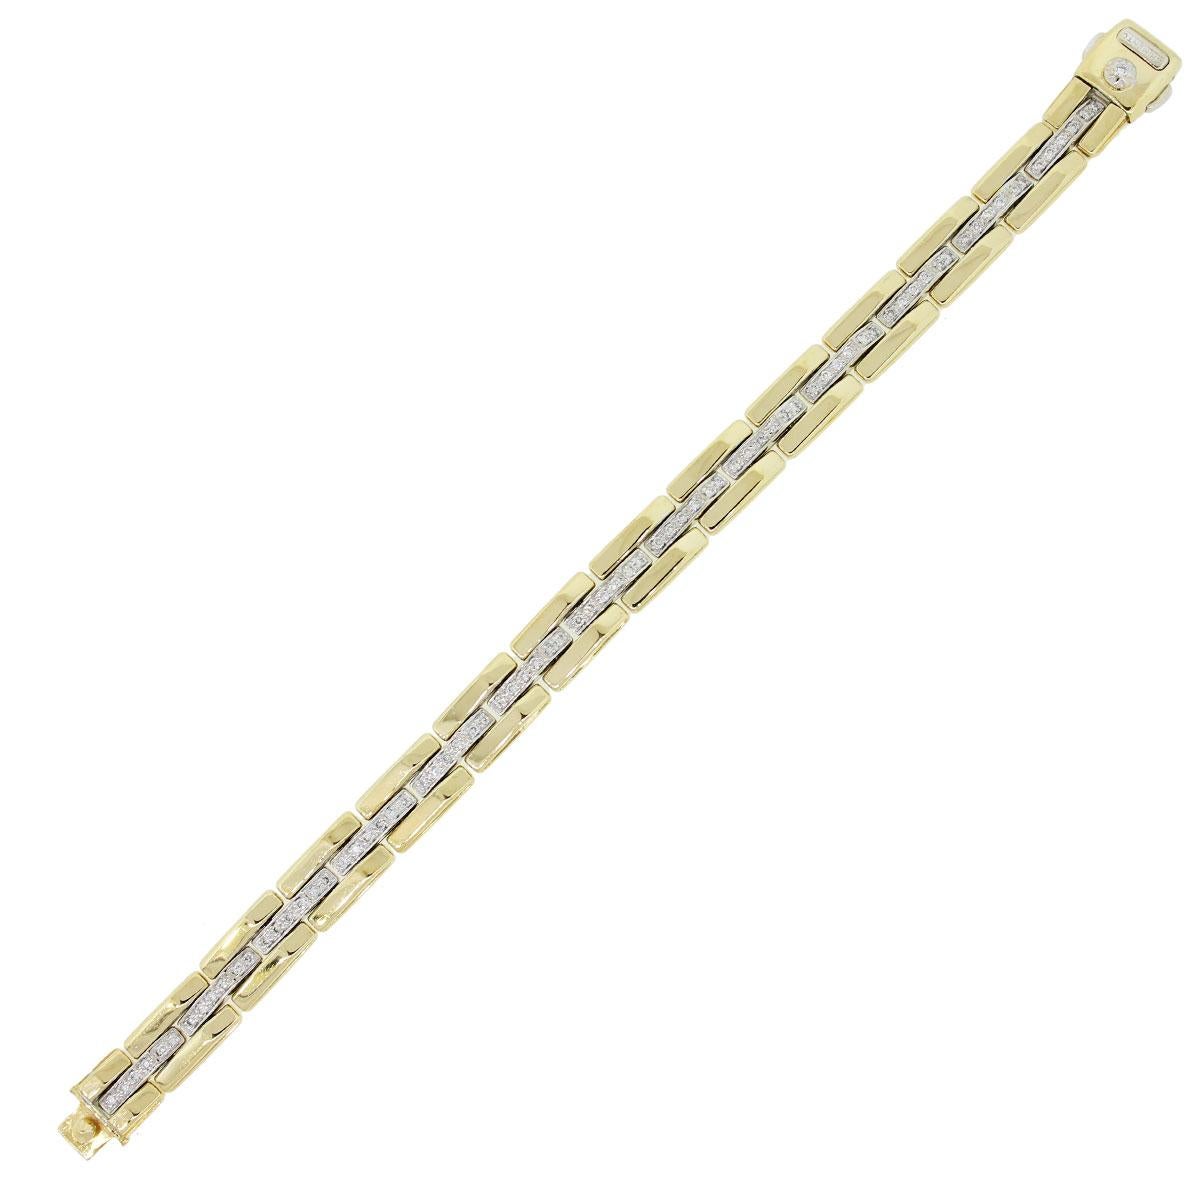 Designer: Chimento
Material: 18k yellow gold
Diamond Details: Approximately 0.80ctw of round brilliant diamonds. Diamonds are G/H in color and VS in clarity.
Fastening: Push Lock in place clasp
Measurements: Bracelet is 7.25″ in length, 0.34